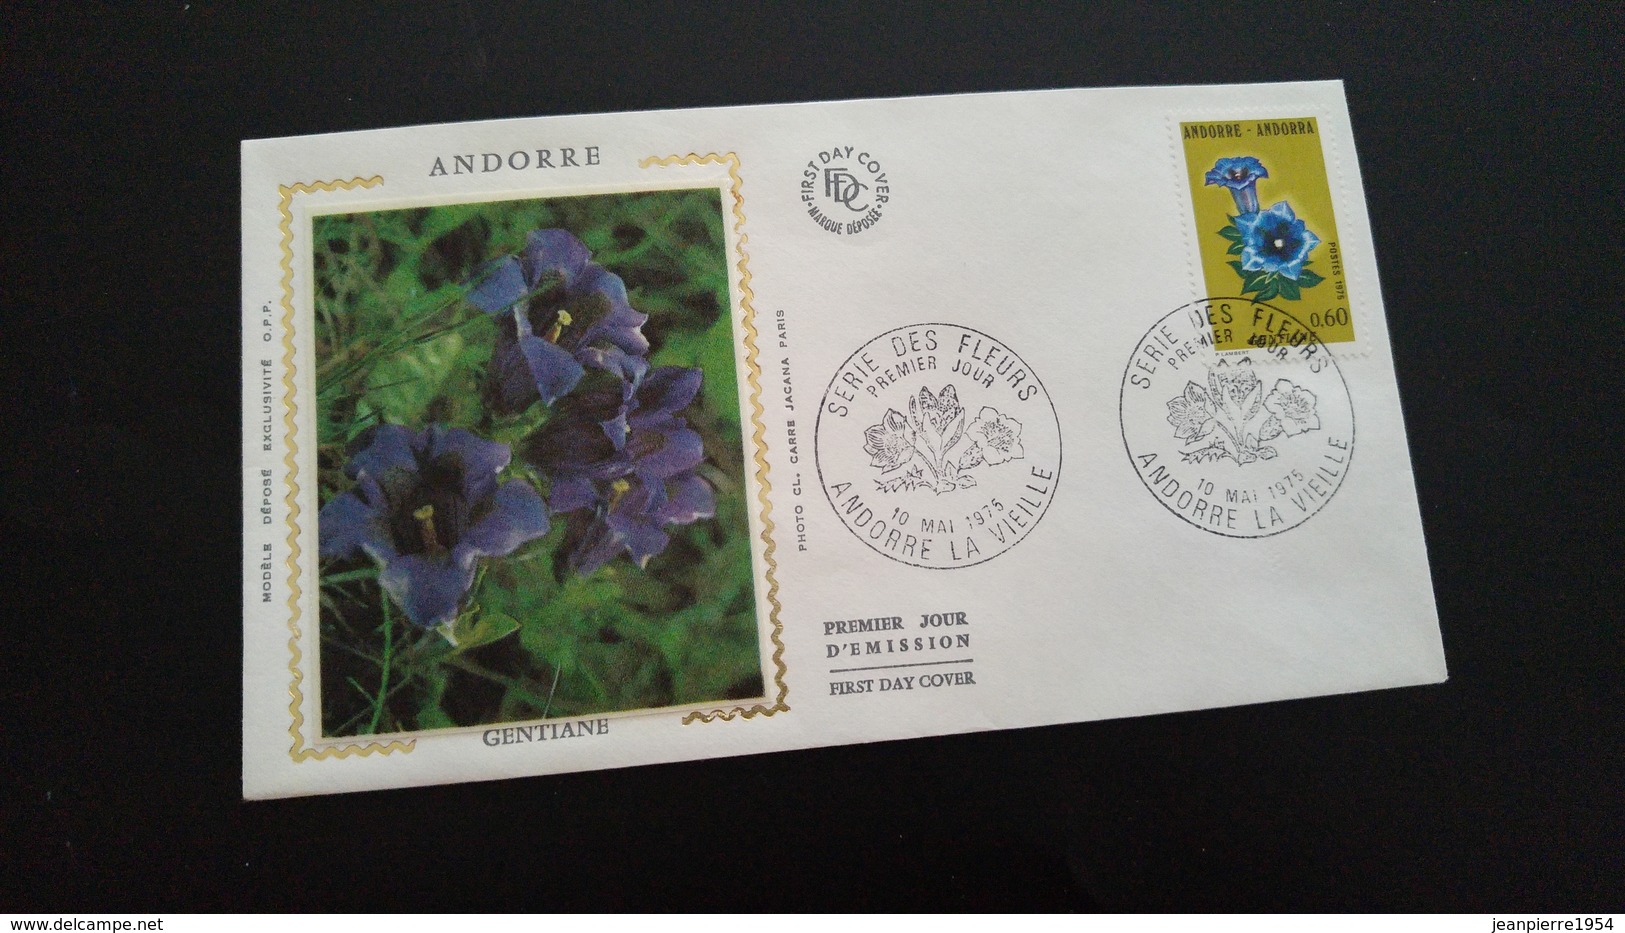 timbres andore